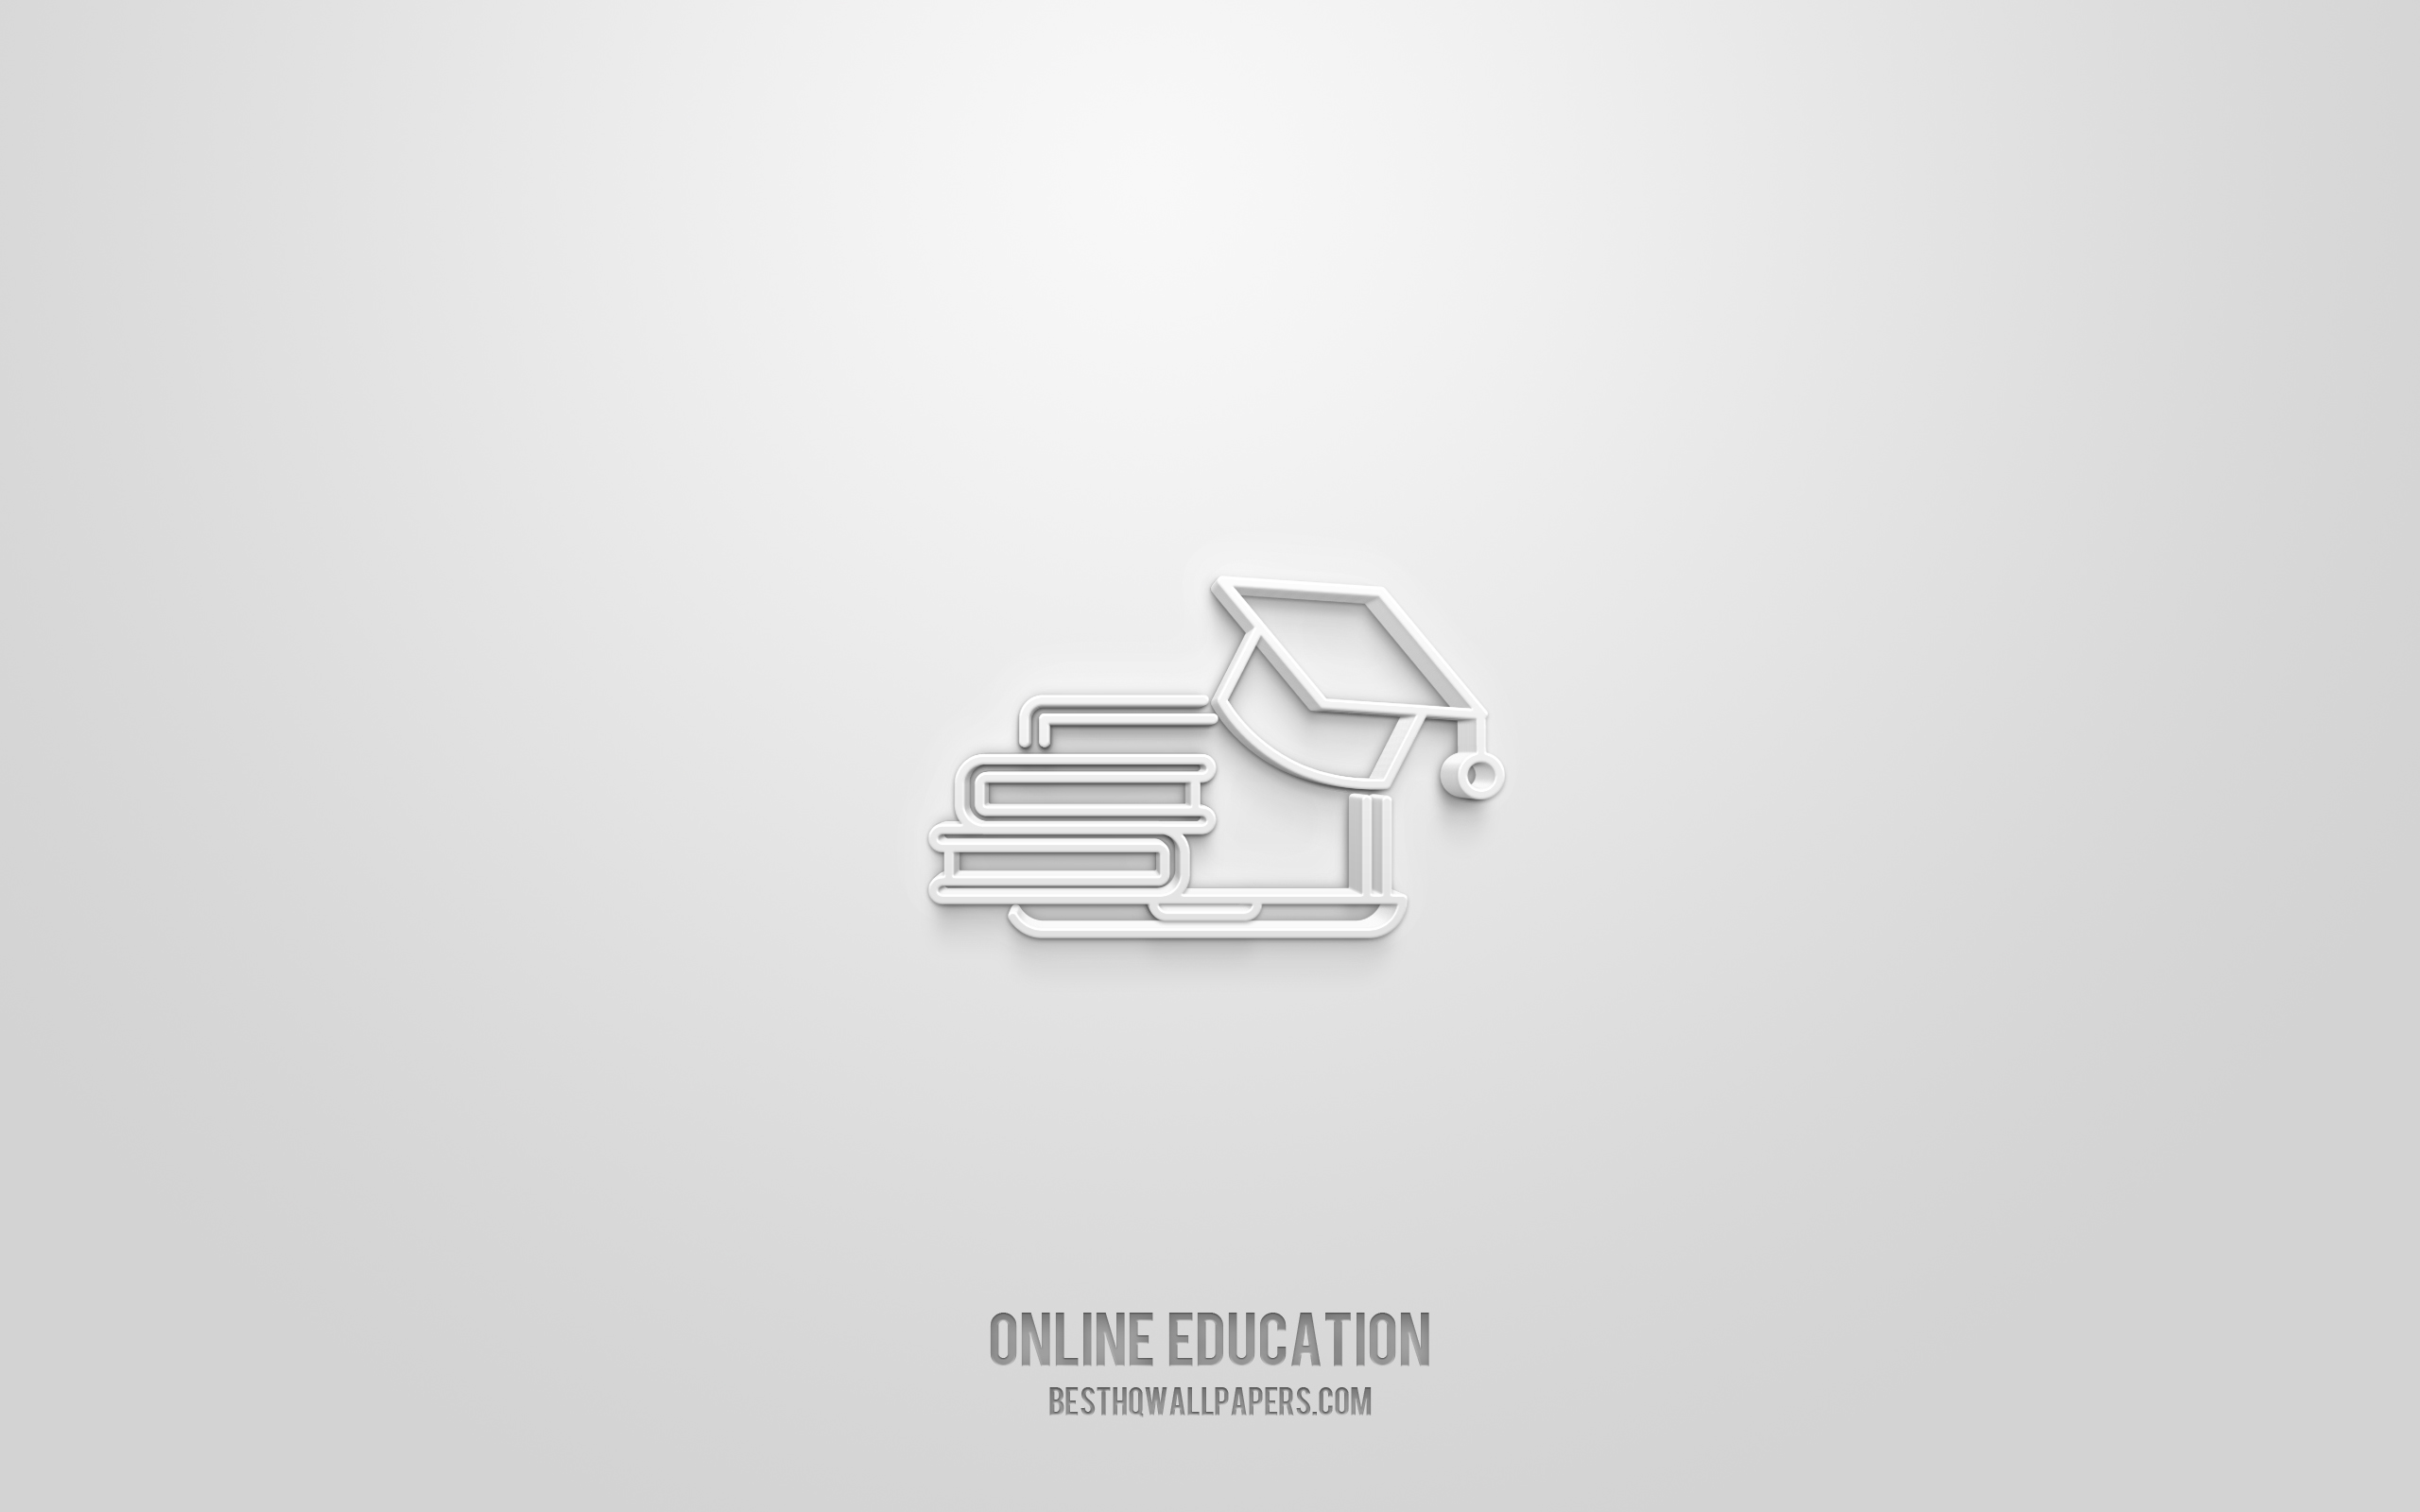 Download wallpaper Online Education 3D icon, white background, 3D symbols, Online Education, Education icons, 3D icons, Online Education sign, Science 3D icons for desktop with resolution 2560x1600. High Quality HD picture wallpaper